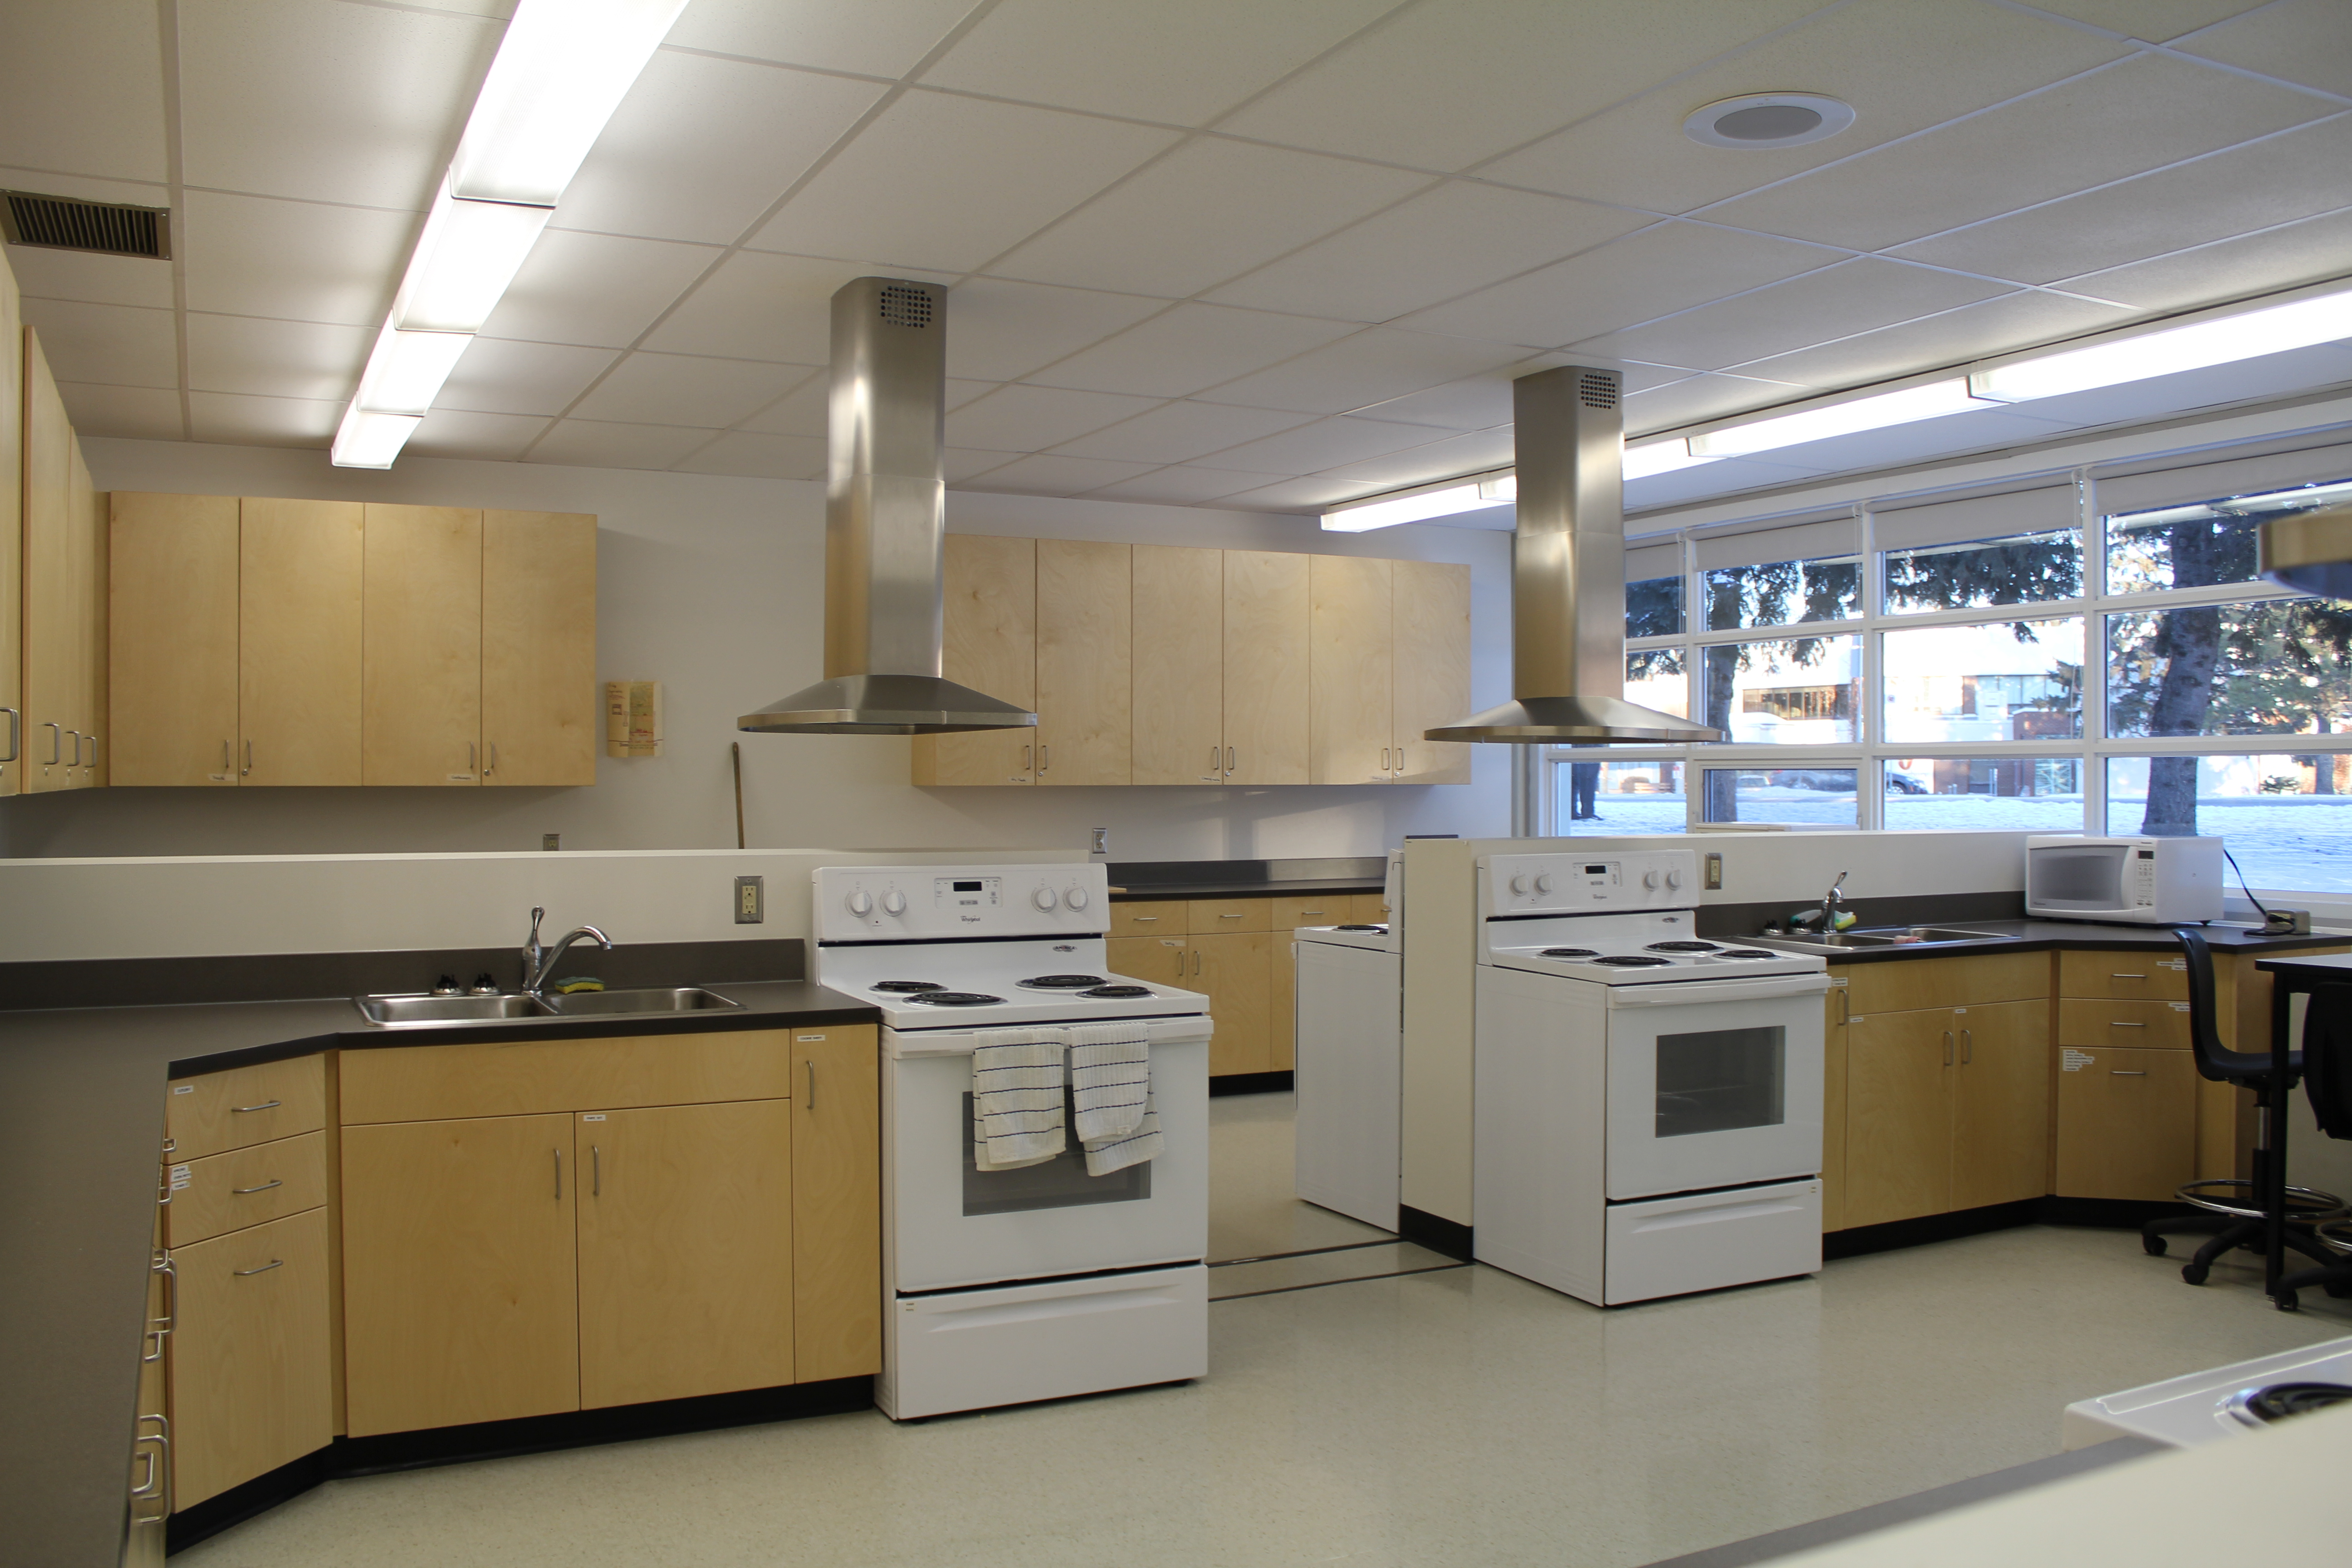 Our new Foods Lab